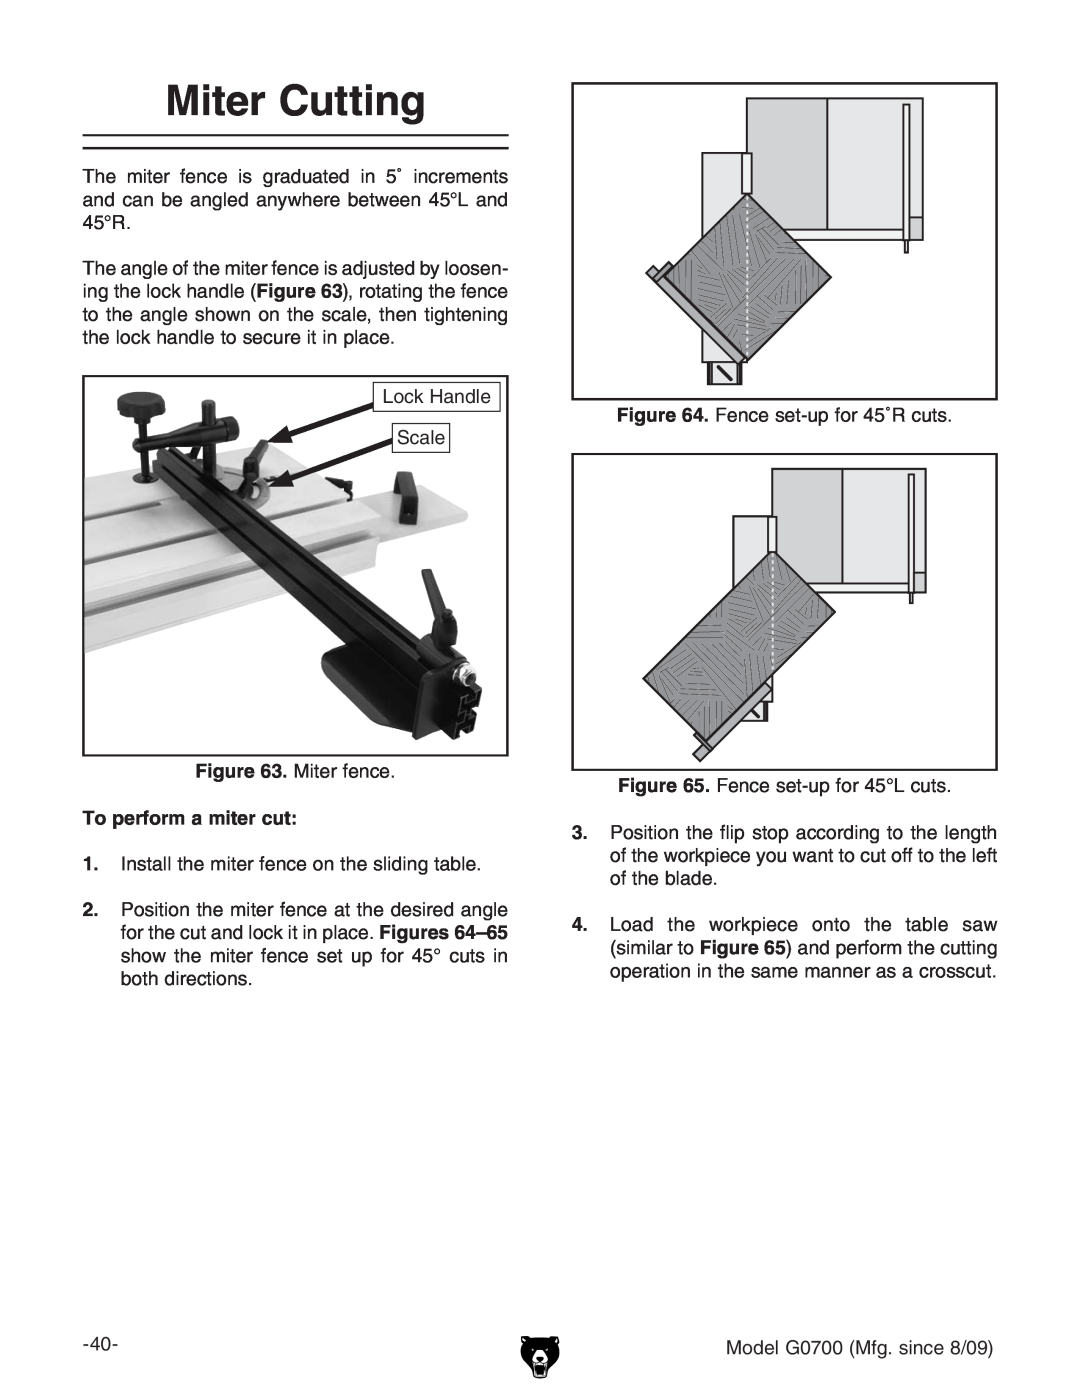 Grizzly G0700 owner manual Miter Cutting, To perform a miter cut 